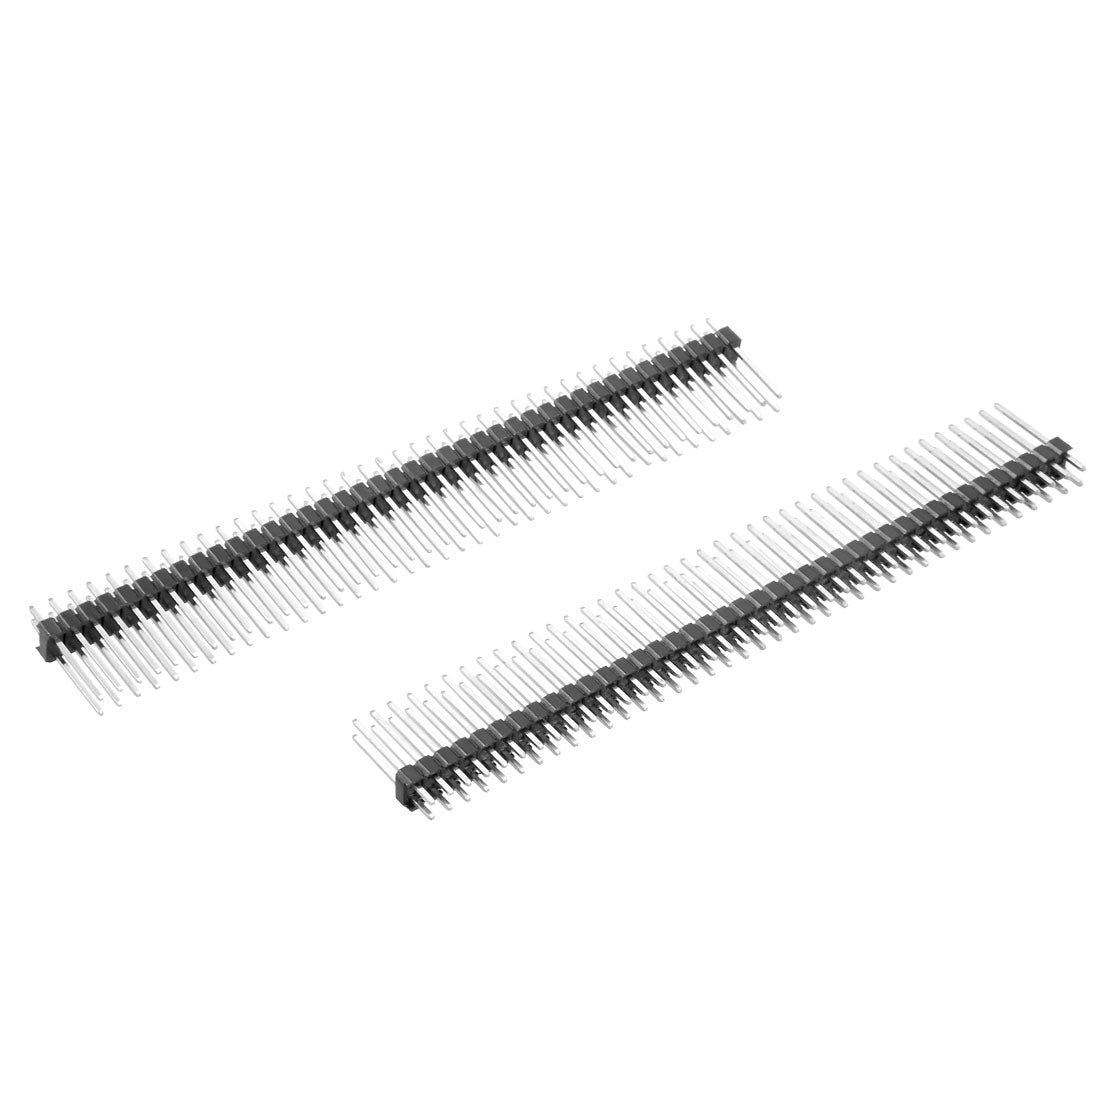 uxcell Uxcell 20Pcs 2.54mm Pitch 40-Pin 16mm Length Double Row Straight Connector Pin Header Strip for Arduino Prototype Shield